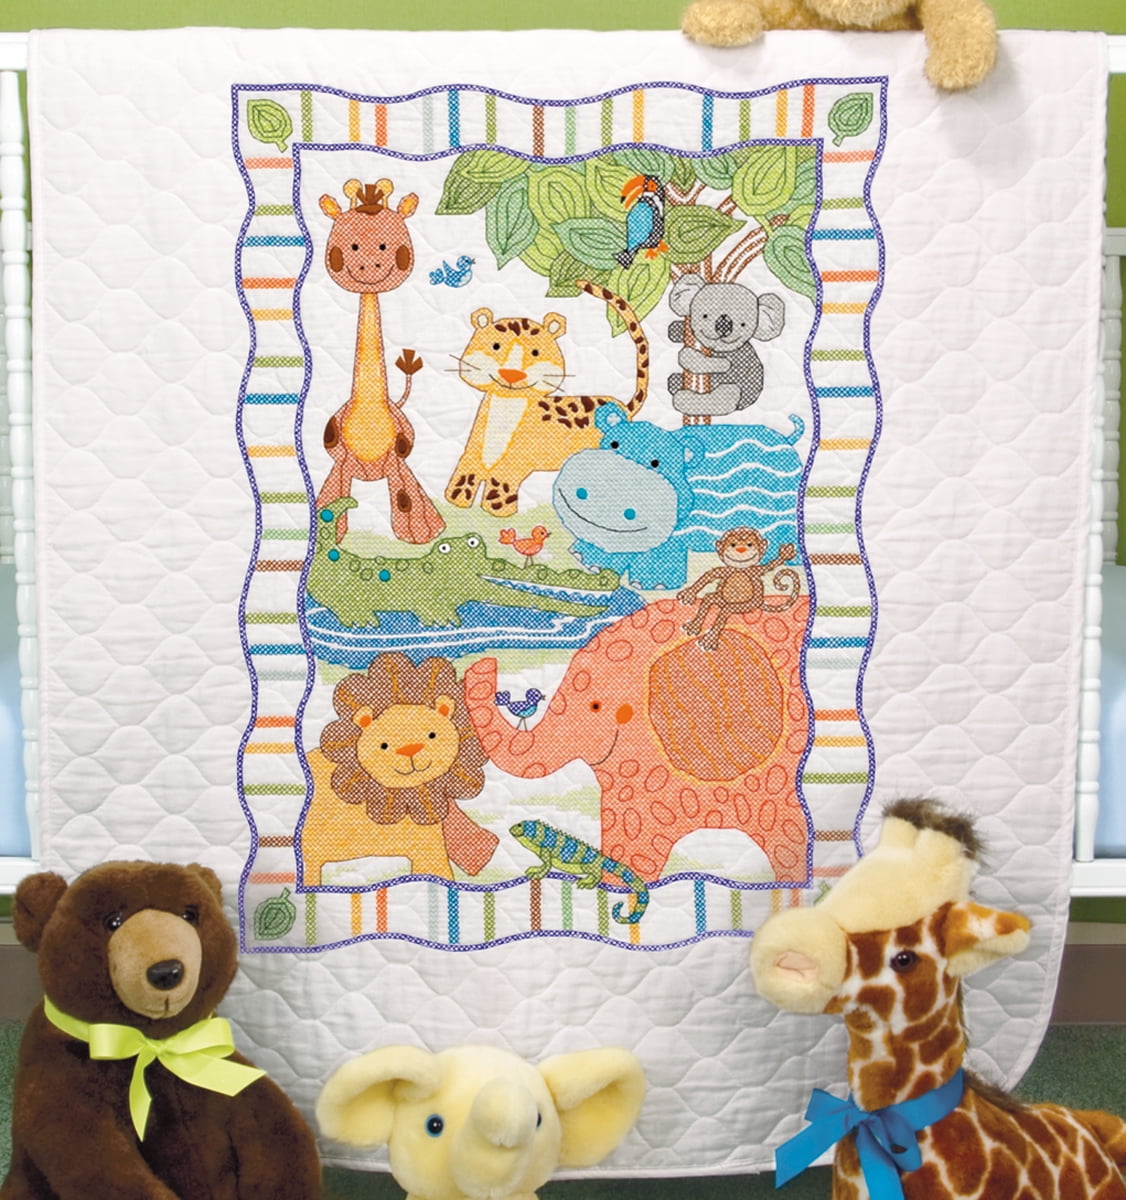 Dimensions Baby Hugs Baby Drawers Quilt Stamped Cross Stitch Kit, 34 x 43